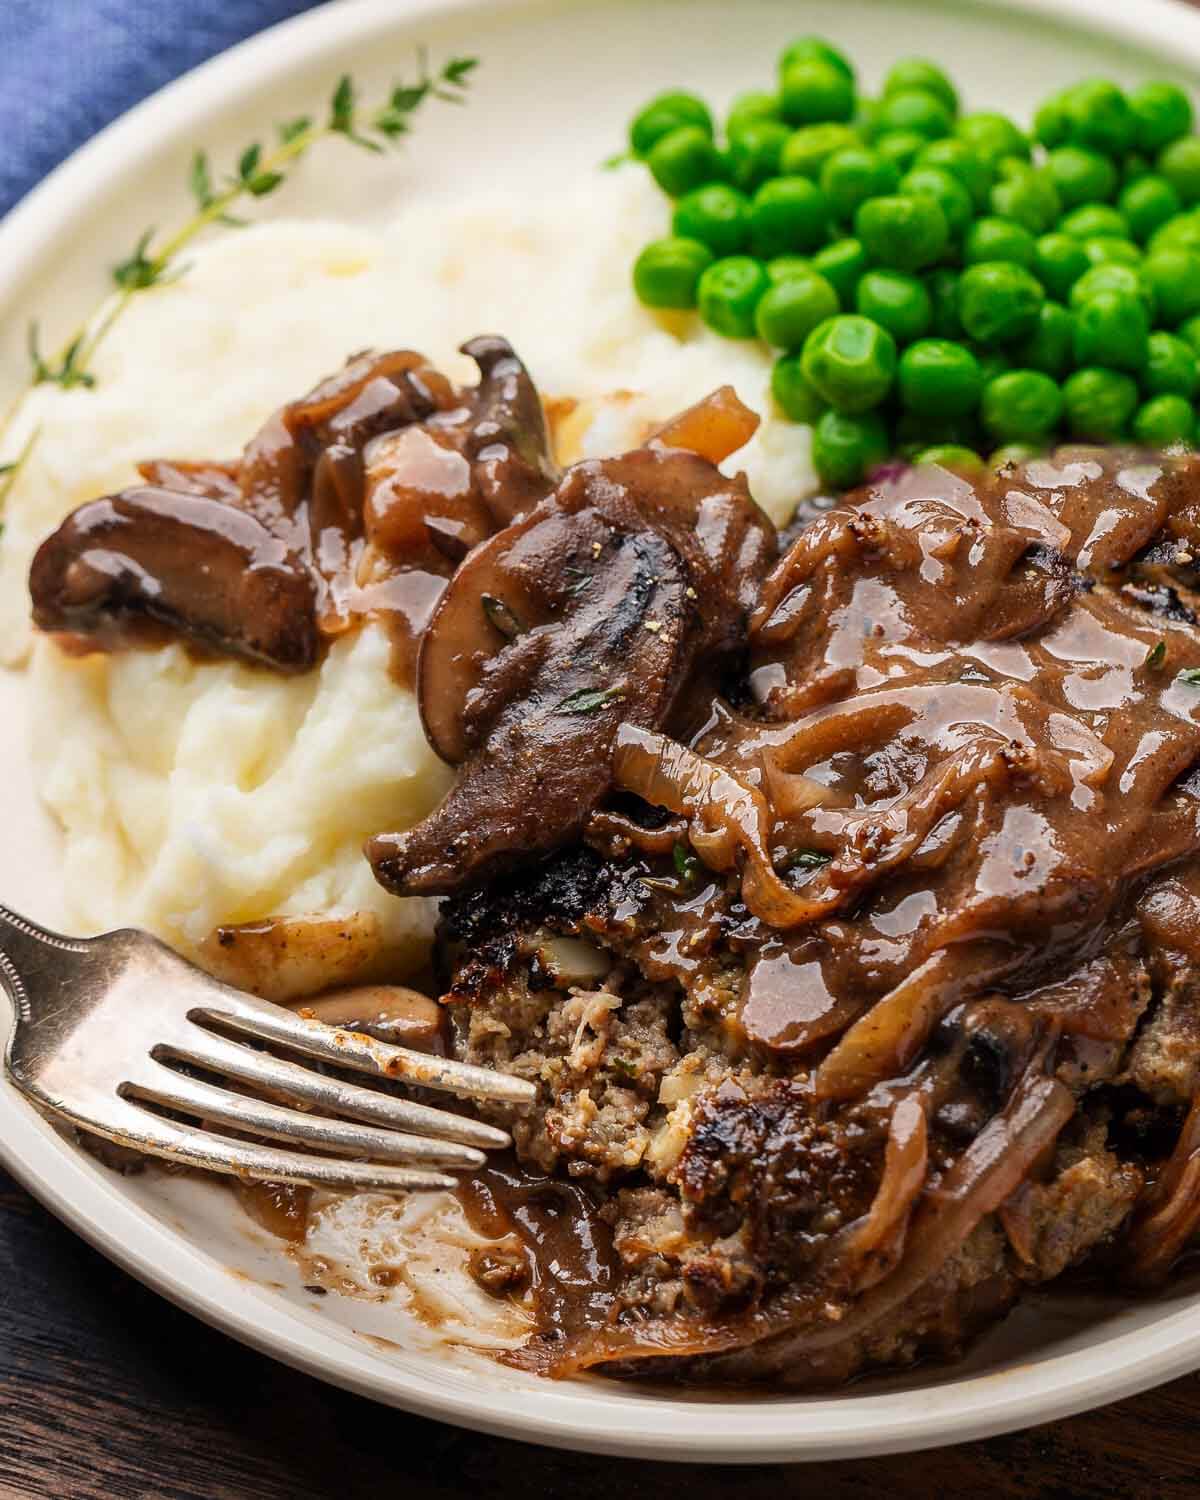 Plate with cut salisbury steak, peas, and mashed potatoes.